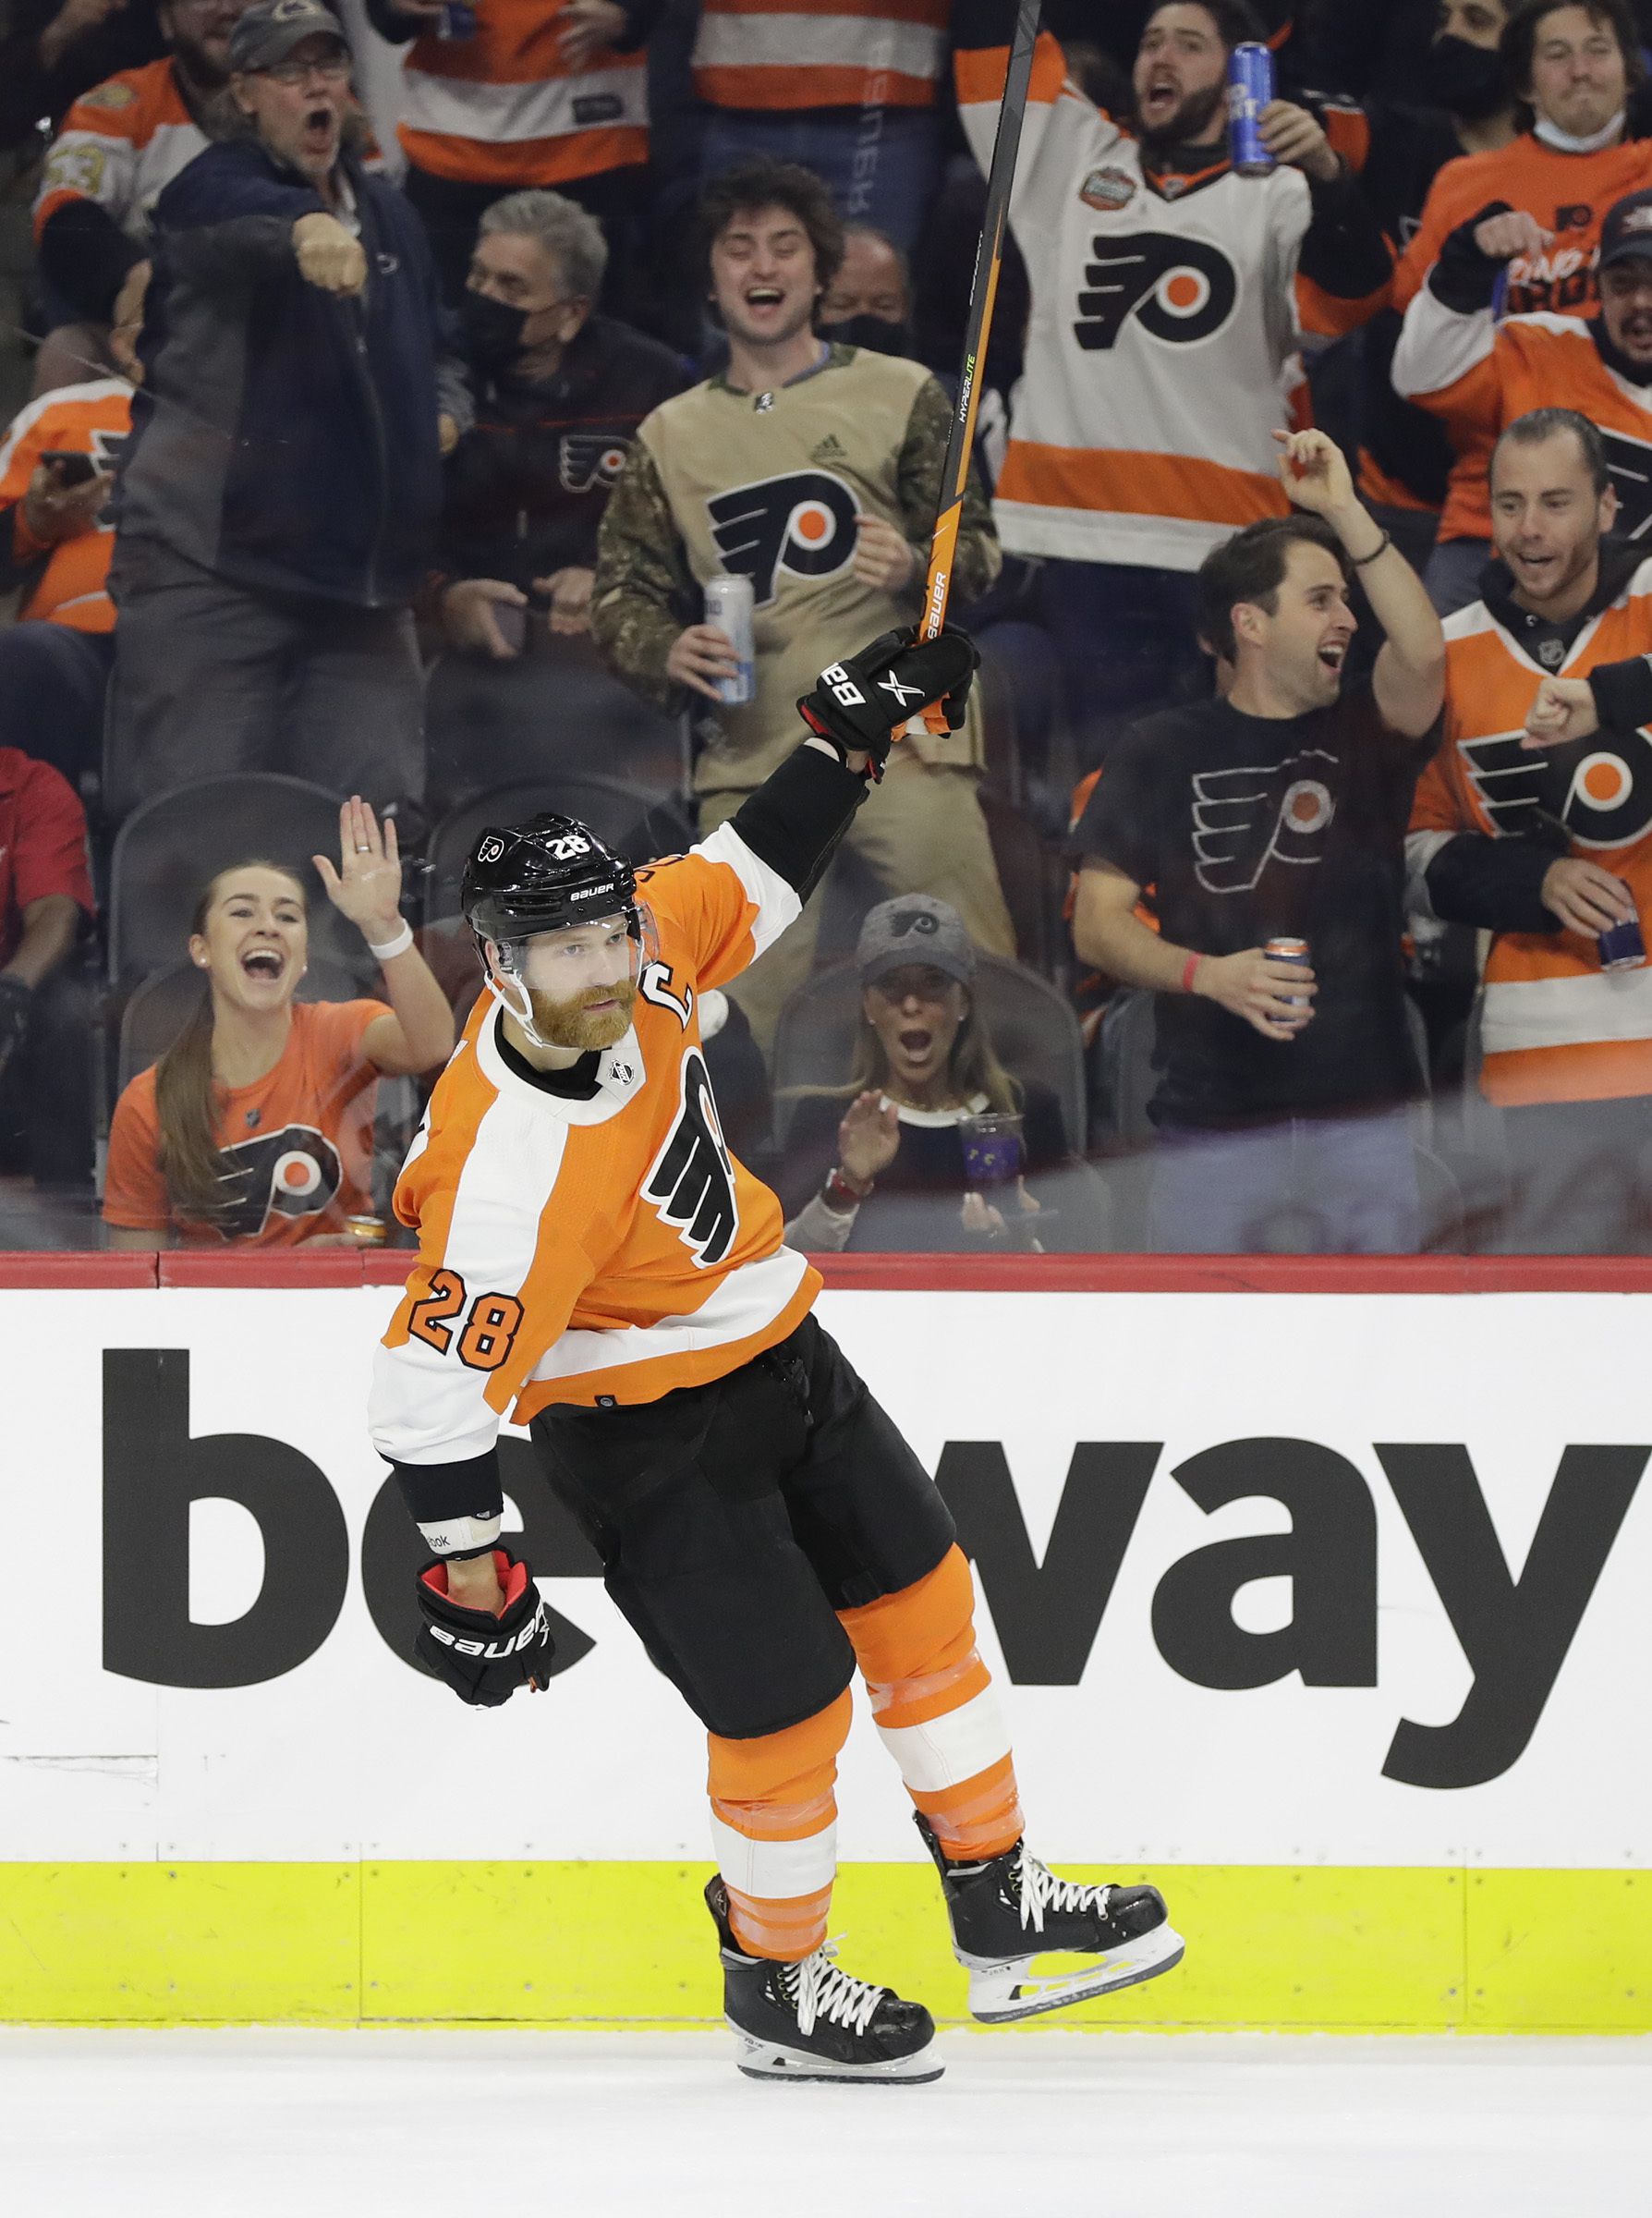 Not-so-cheesy sendoff expected for Flyers' Giroux – Delco Times